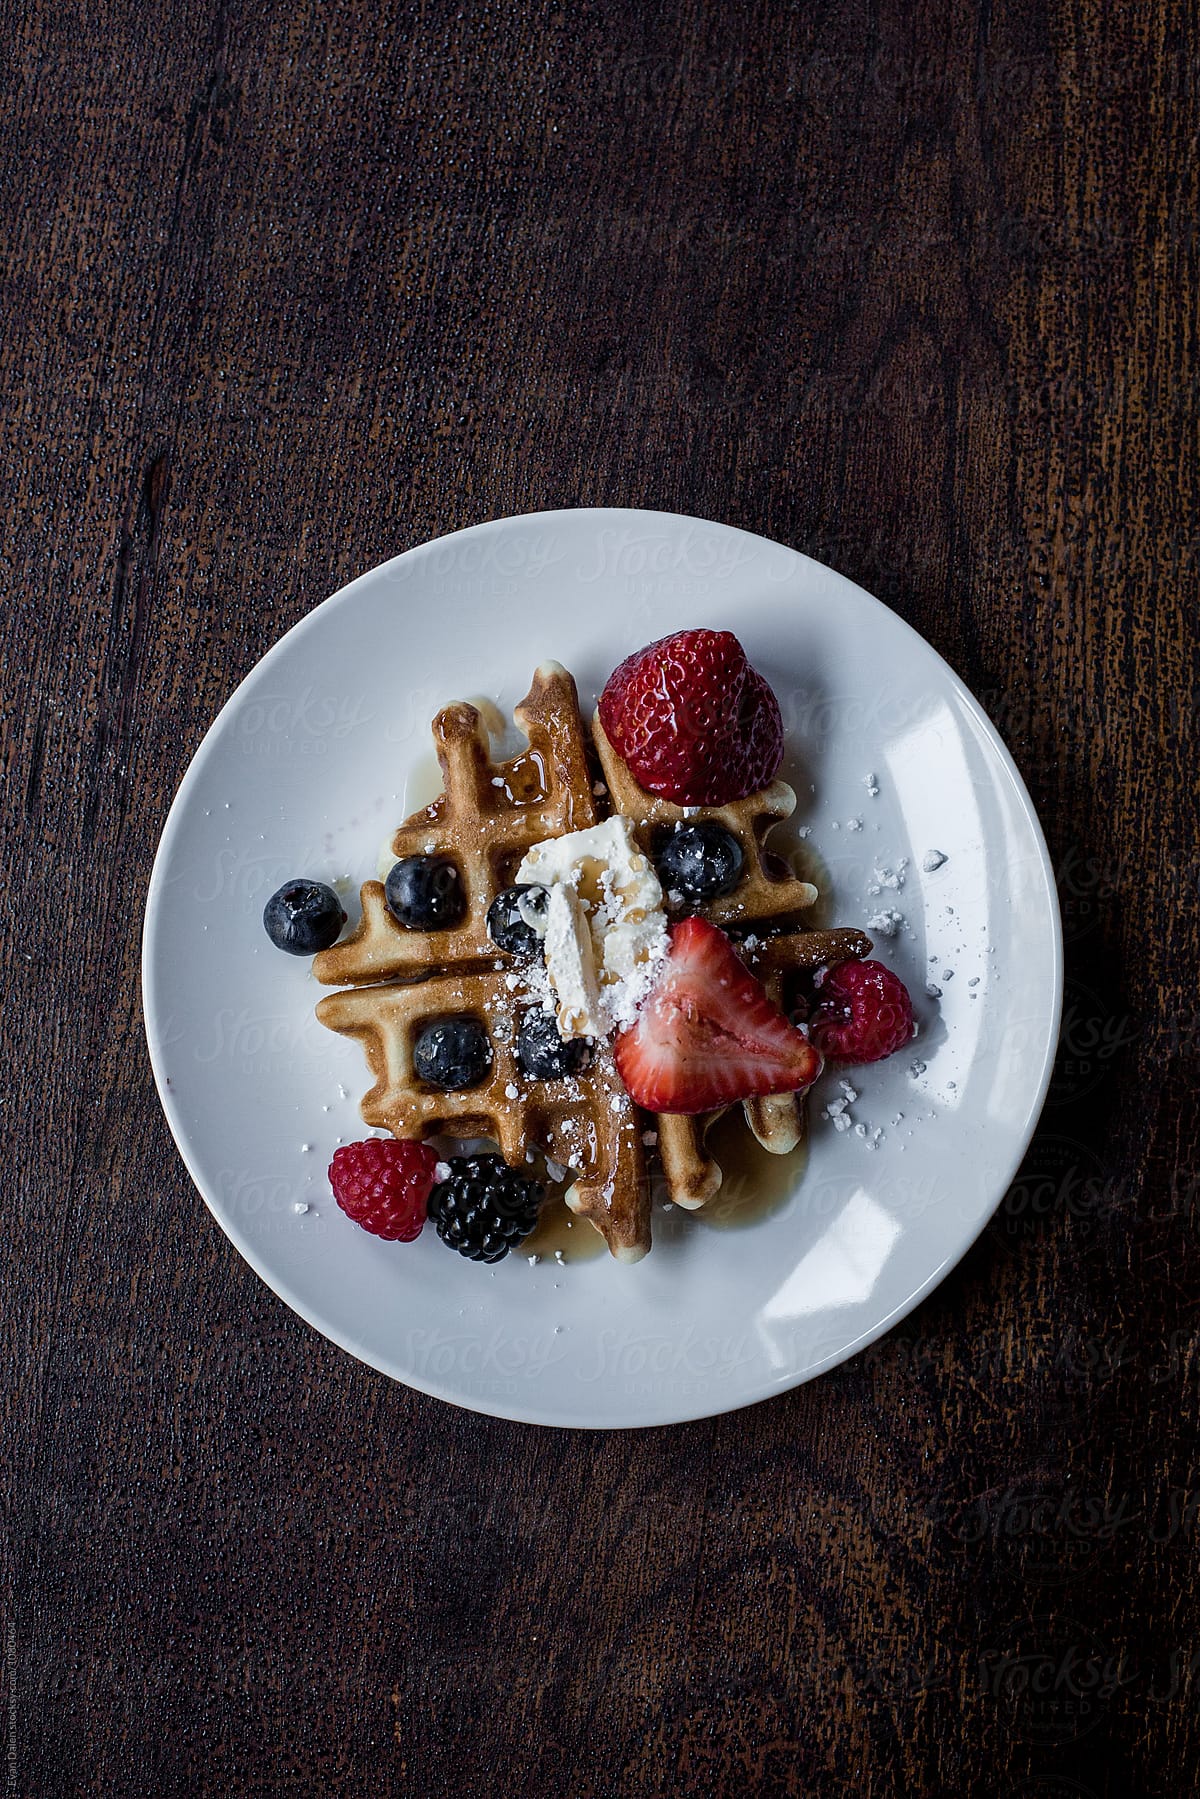 A Waffle Dish With Berries And Syrup